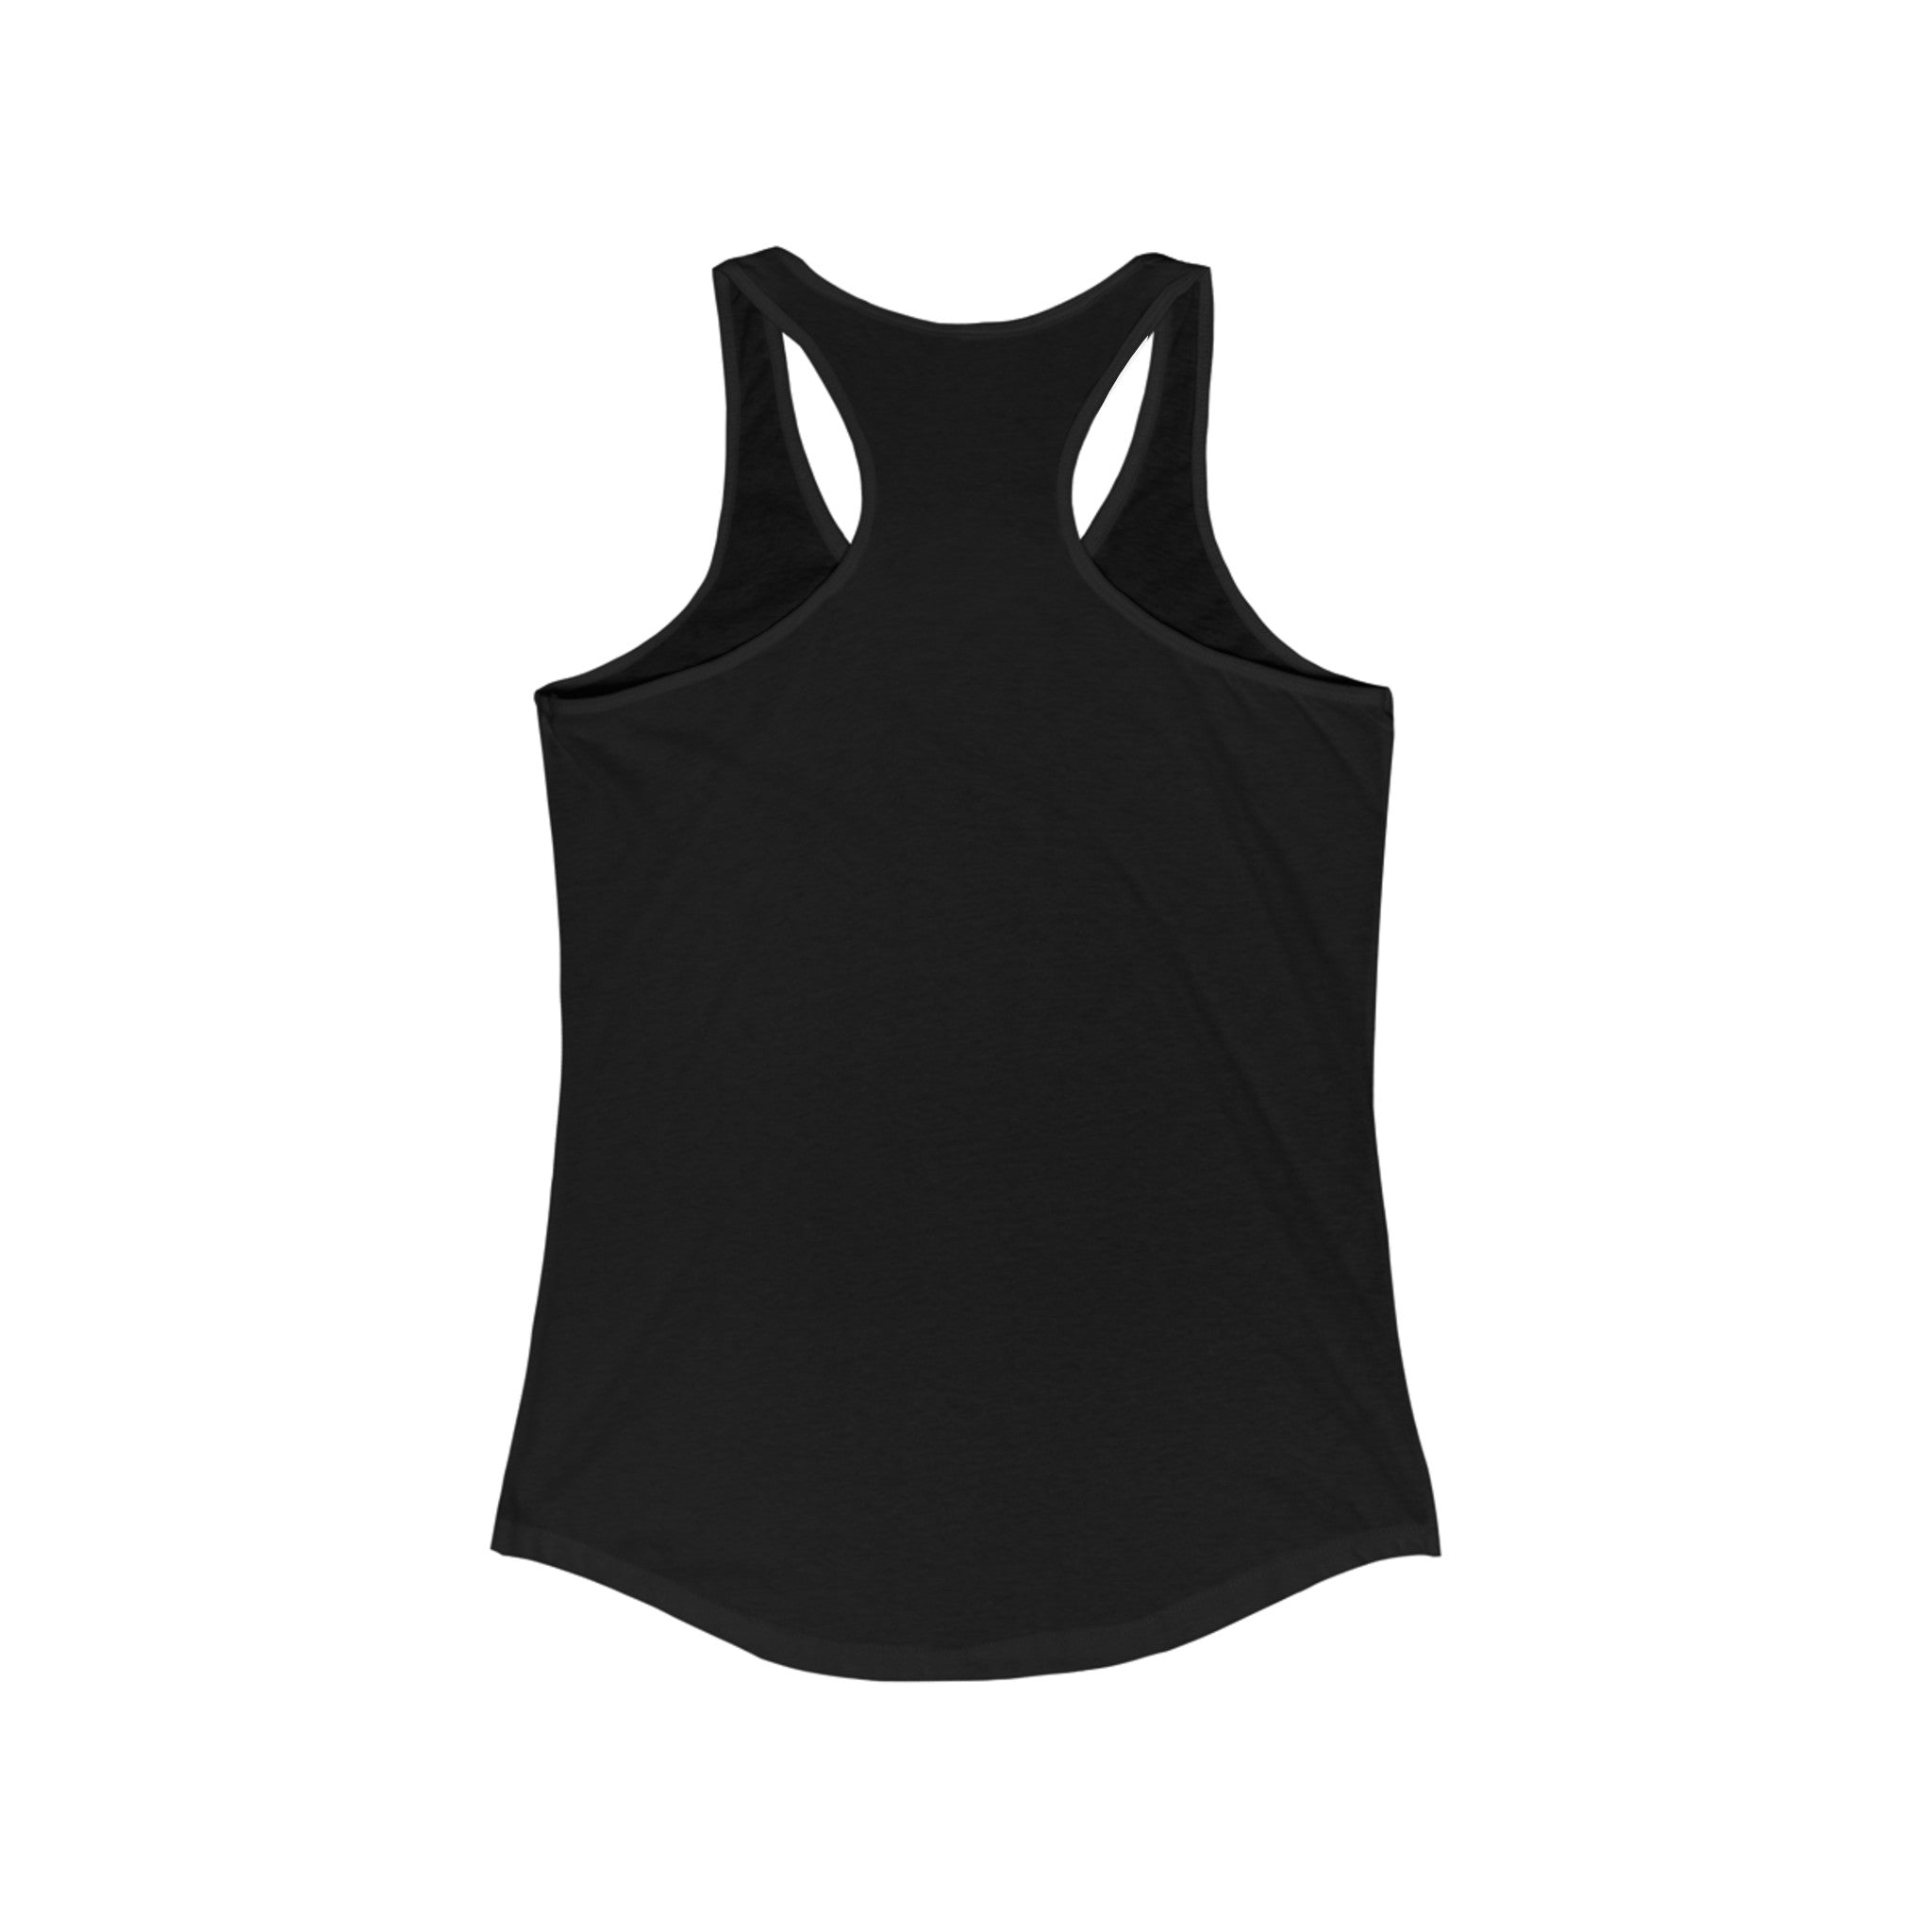 A In-S-P-I-Re - Women's Racerback Tank is shown from the back, highlighting its sleeveless design and scooped neckline. This ultra-light black tank top is perfect for active living, offering both comfort and style.